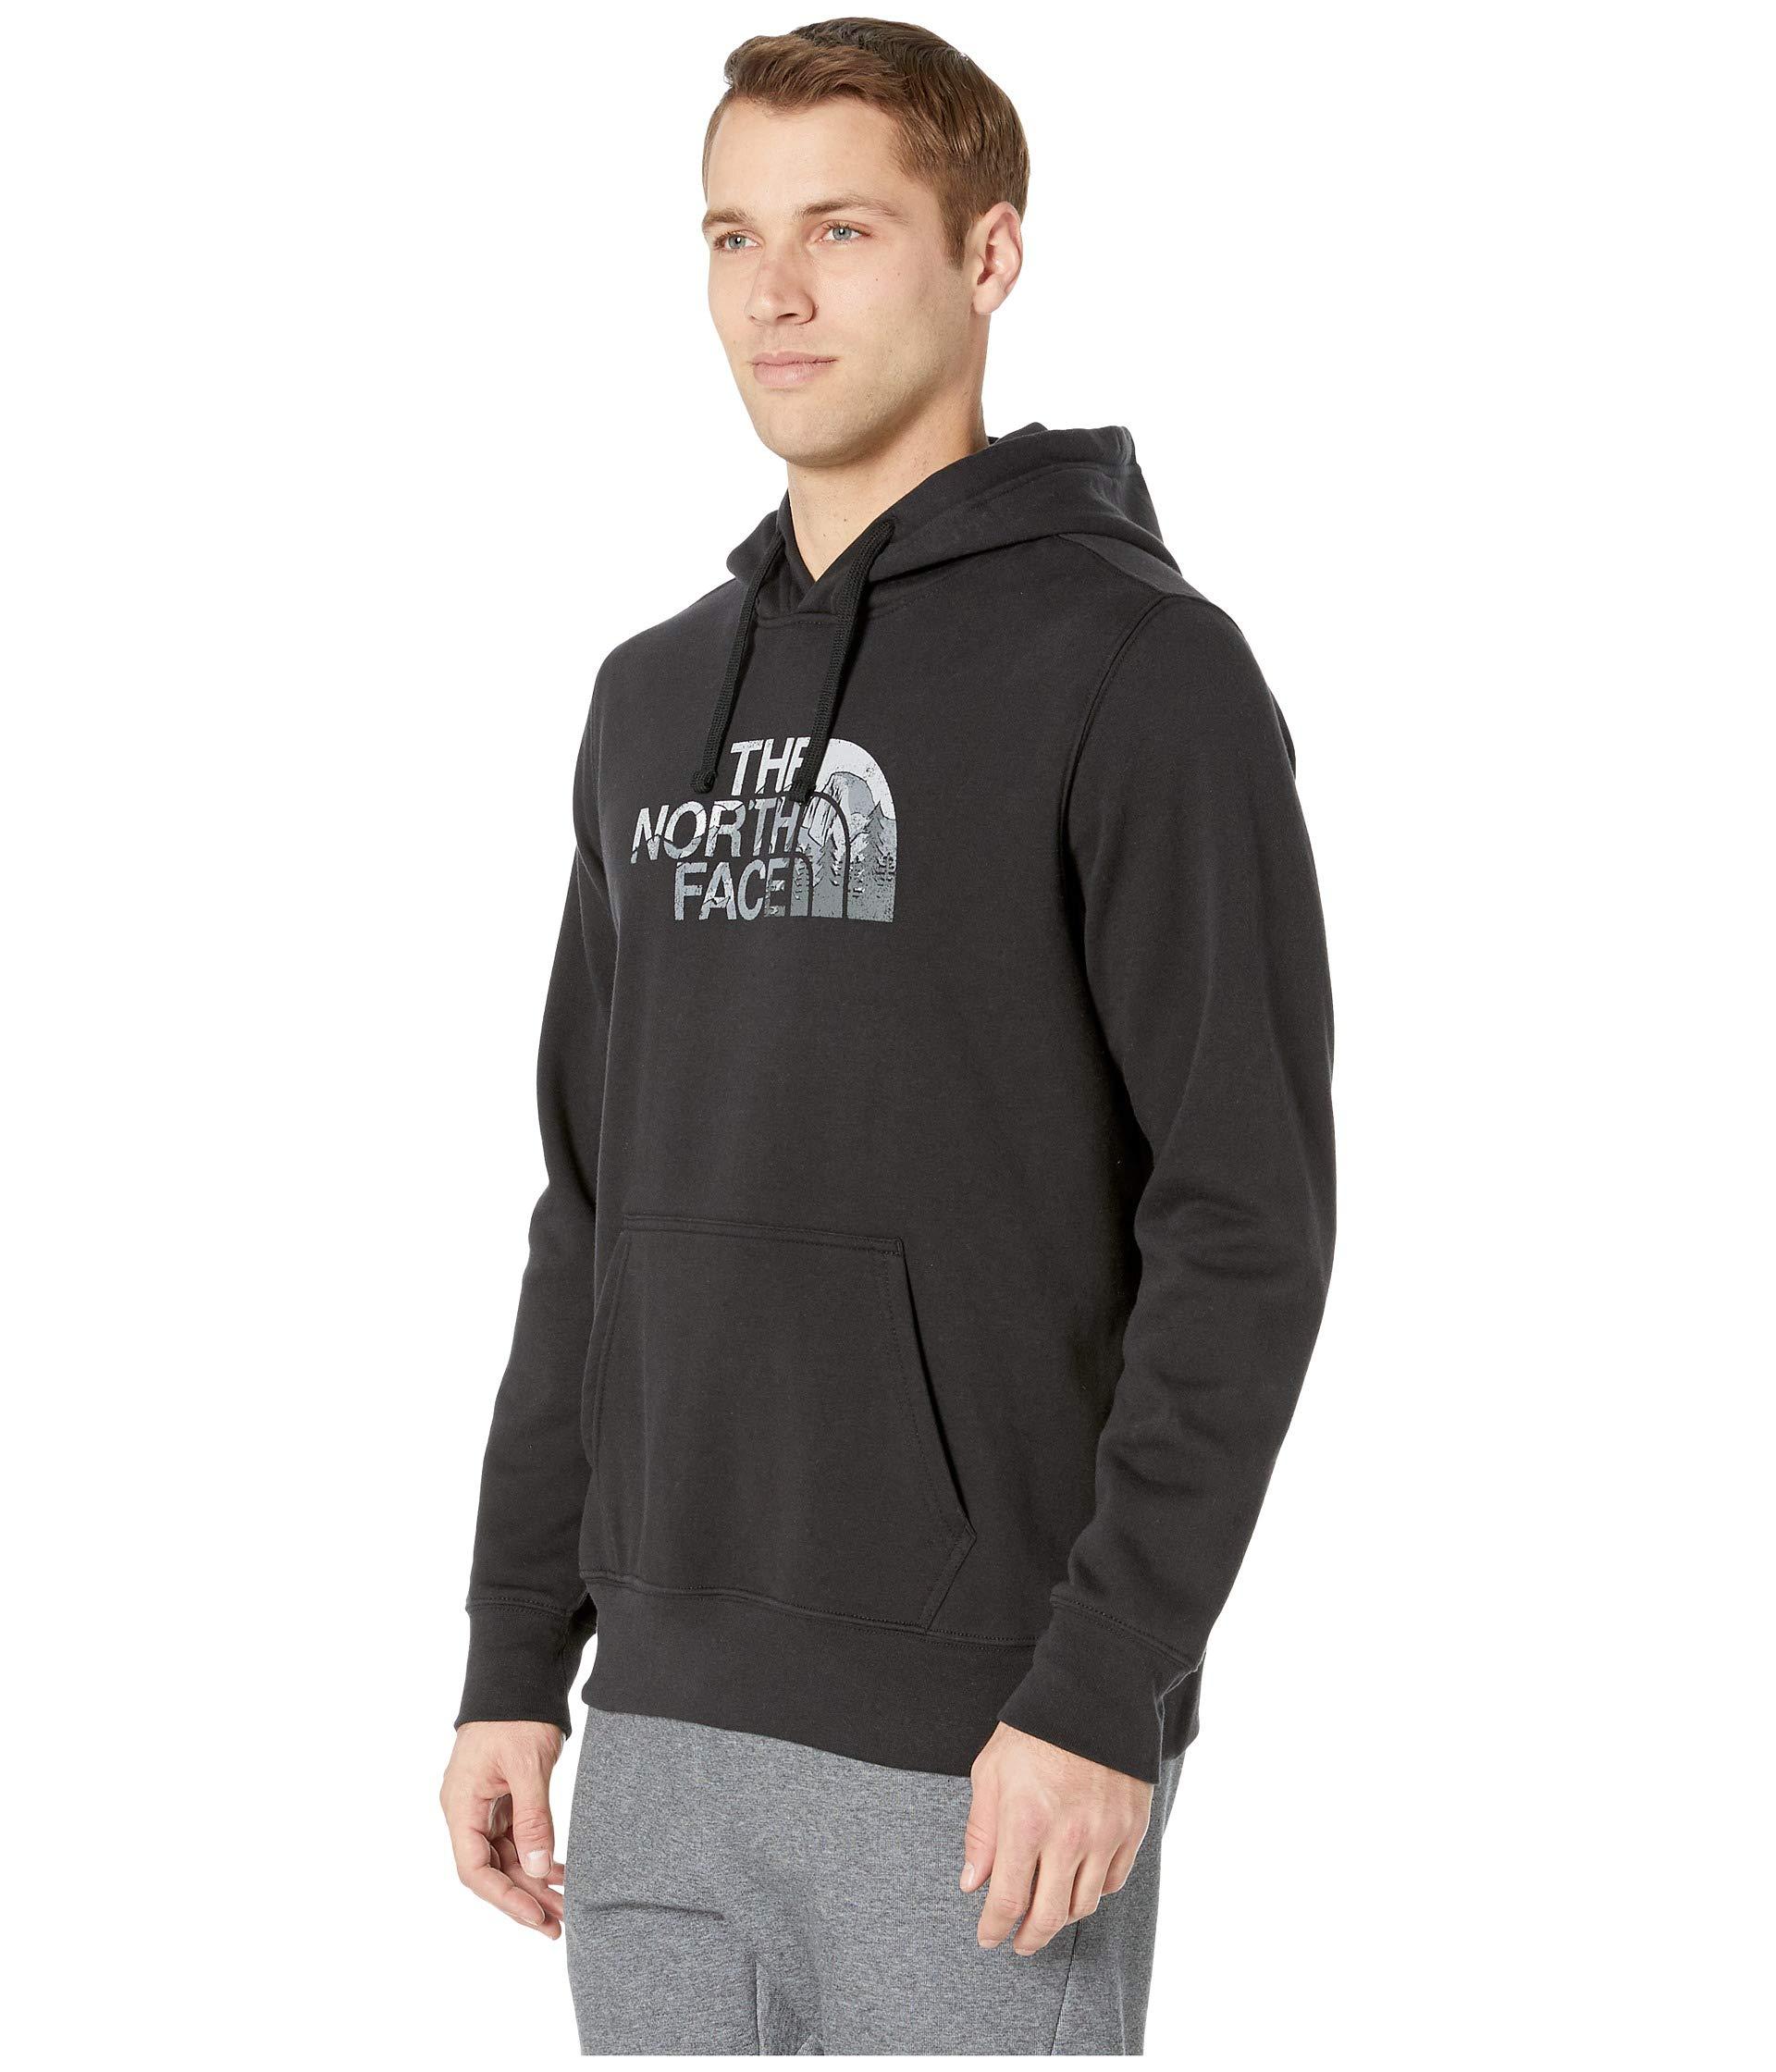 The North Face Cotton Half Dome Pullover Hoodie in Black for Men - Lyst